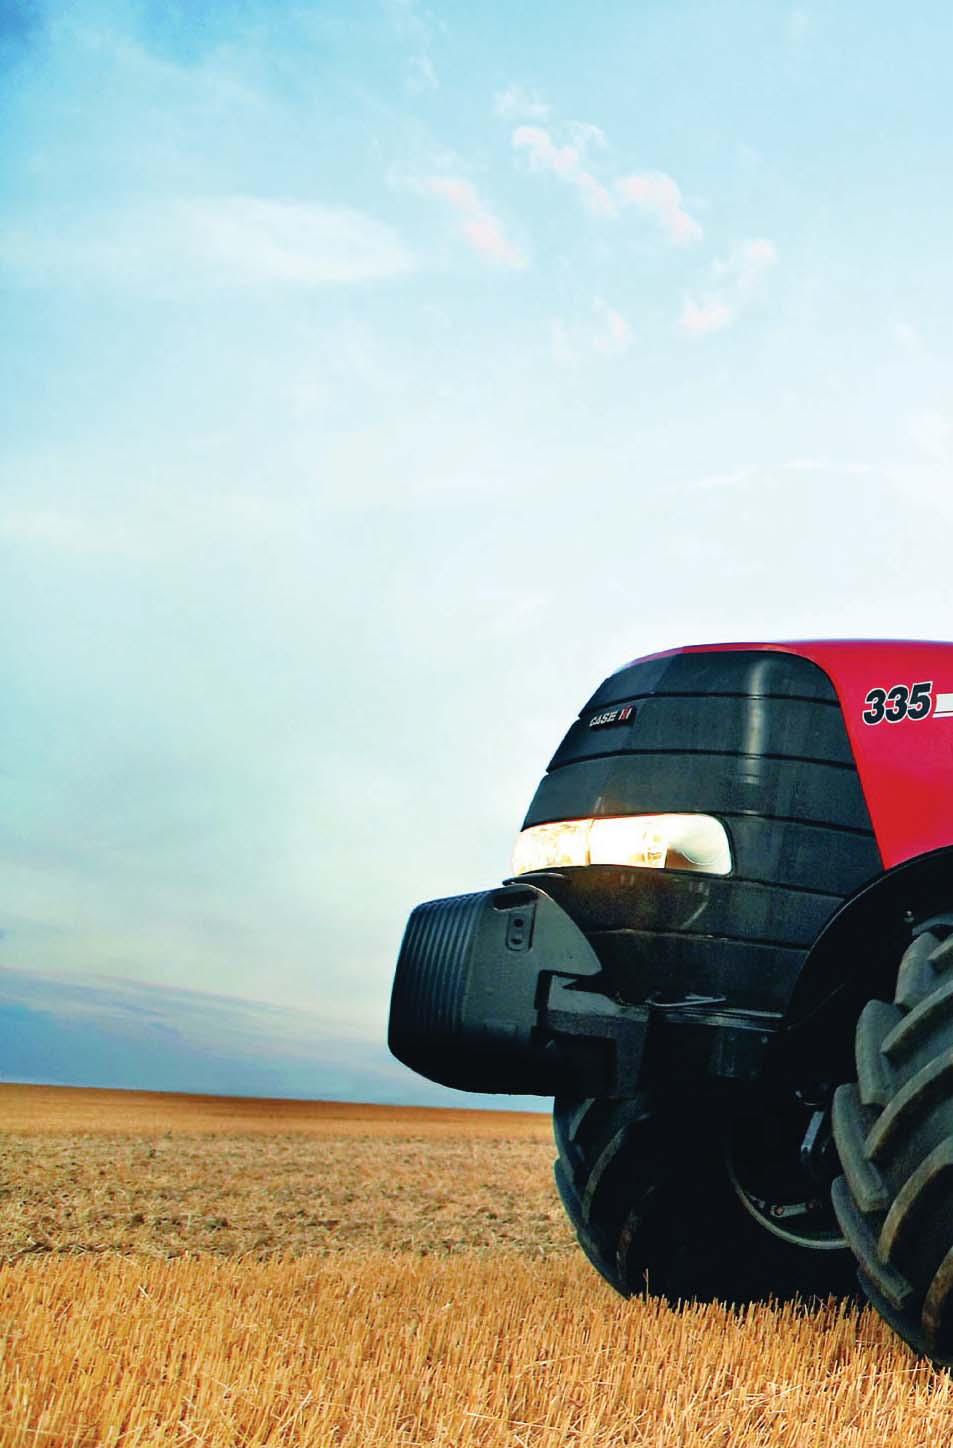 OUR HERITAGE WELCOME TO CASE IH. The Case IH brand represents a tradition of leadership and innovation.